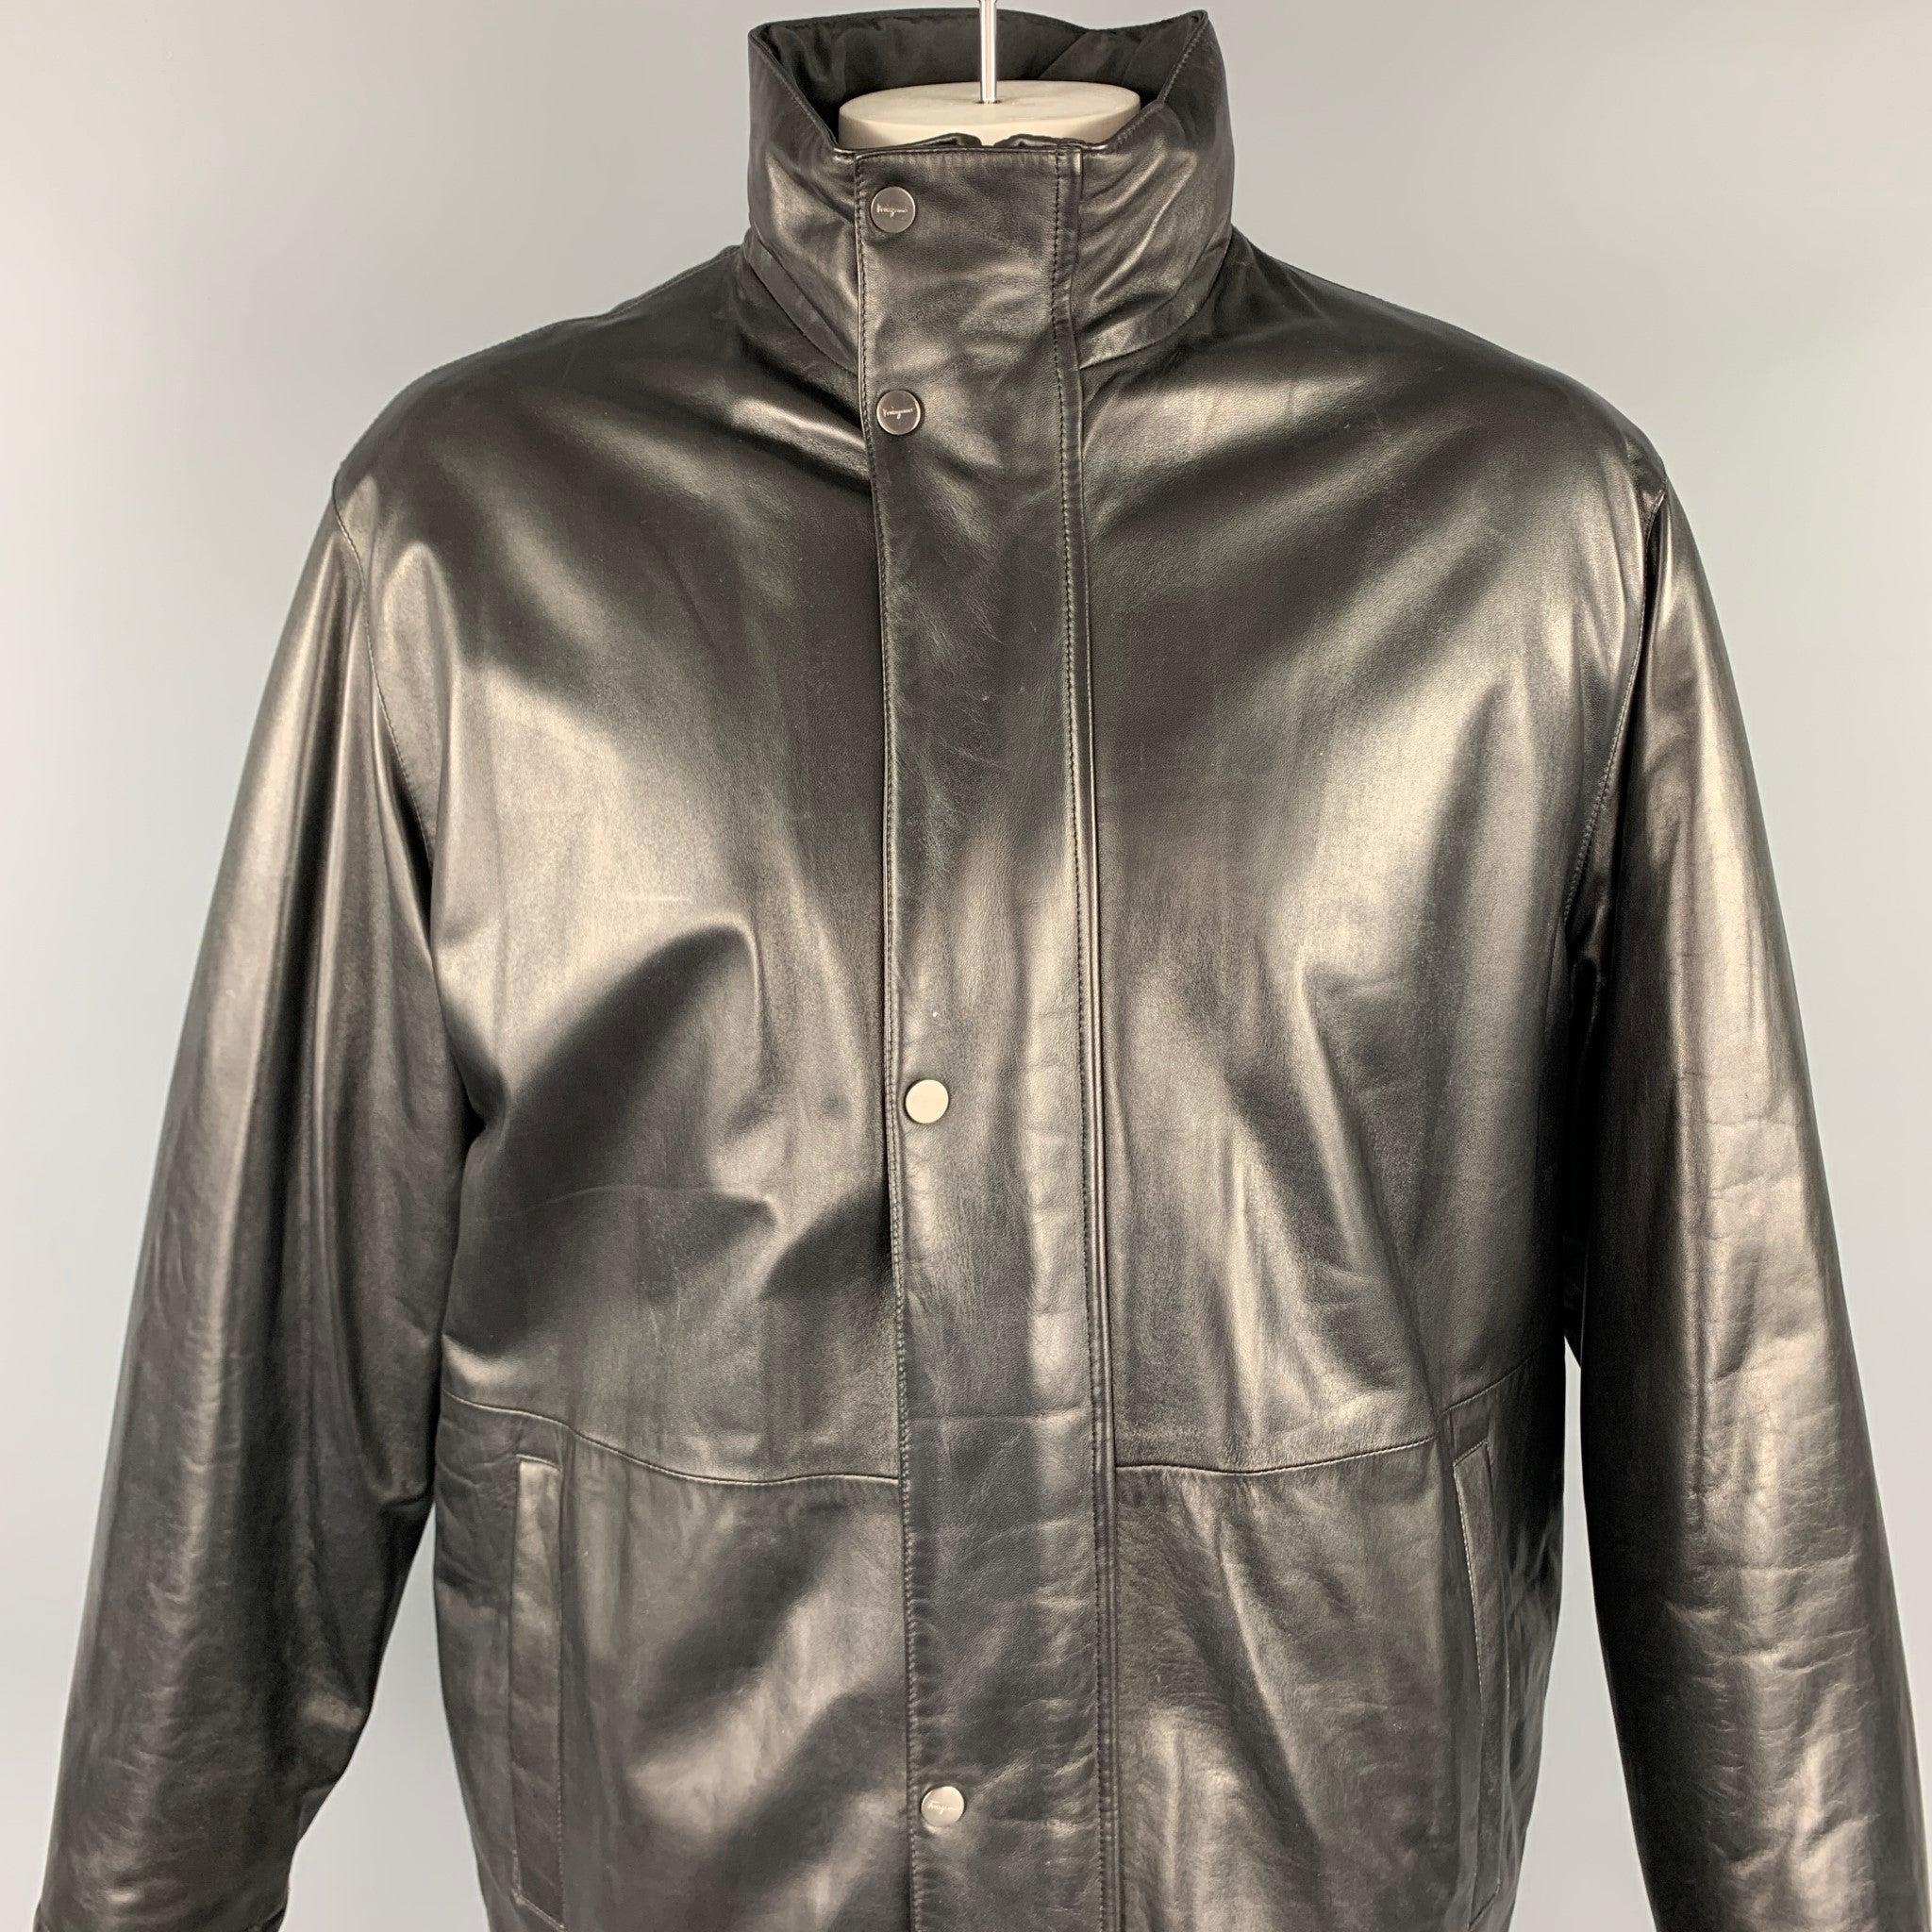 SALVATORE FERRAGAMO coat comes in a black leather featuring a reversible style, high collar, slit pockets, and a zip & snap button closure. Made in Italy.Very Good
Pre-Owned Condition. 

Marked:  52 

Measurements: 
 
Shoulder: 22 inches Chest: 50